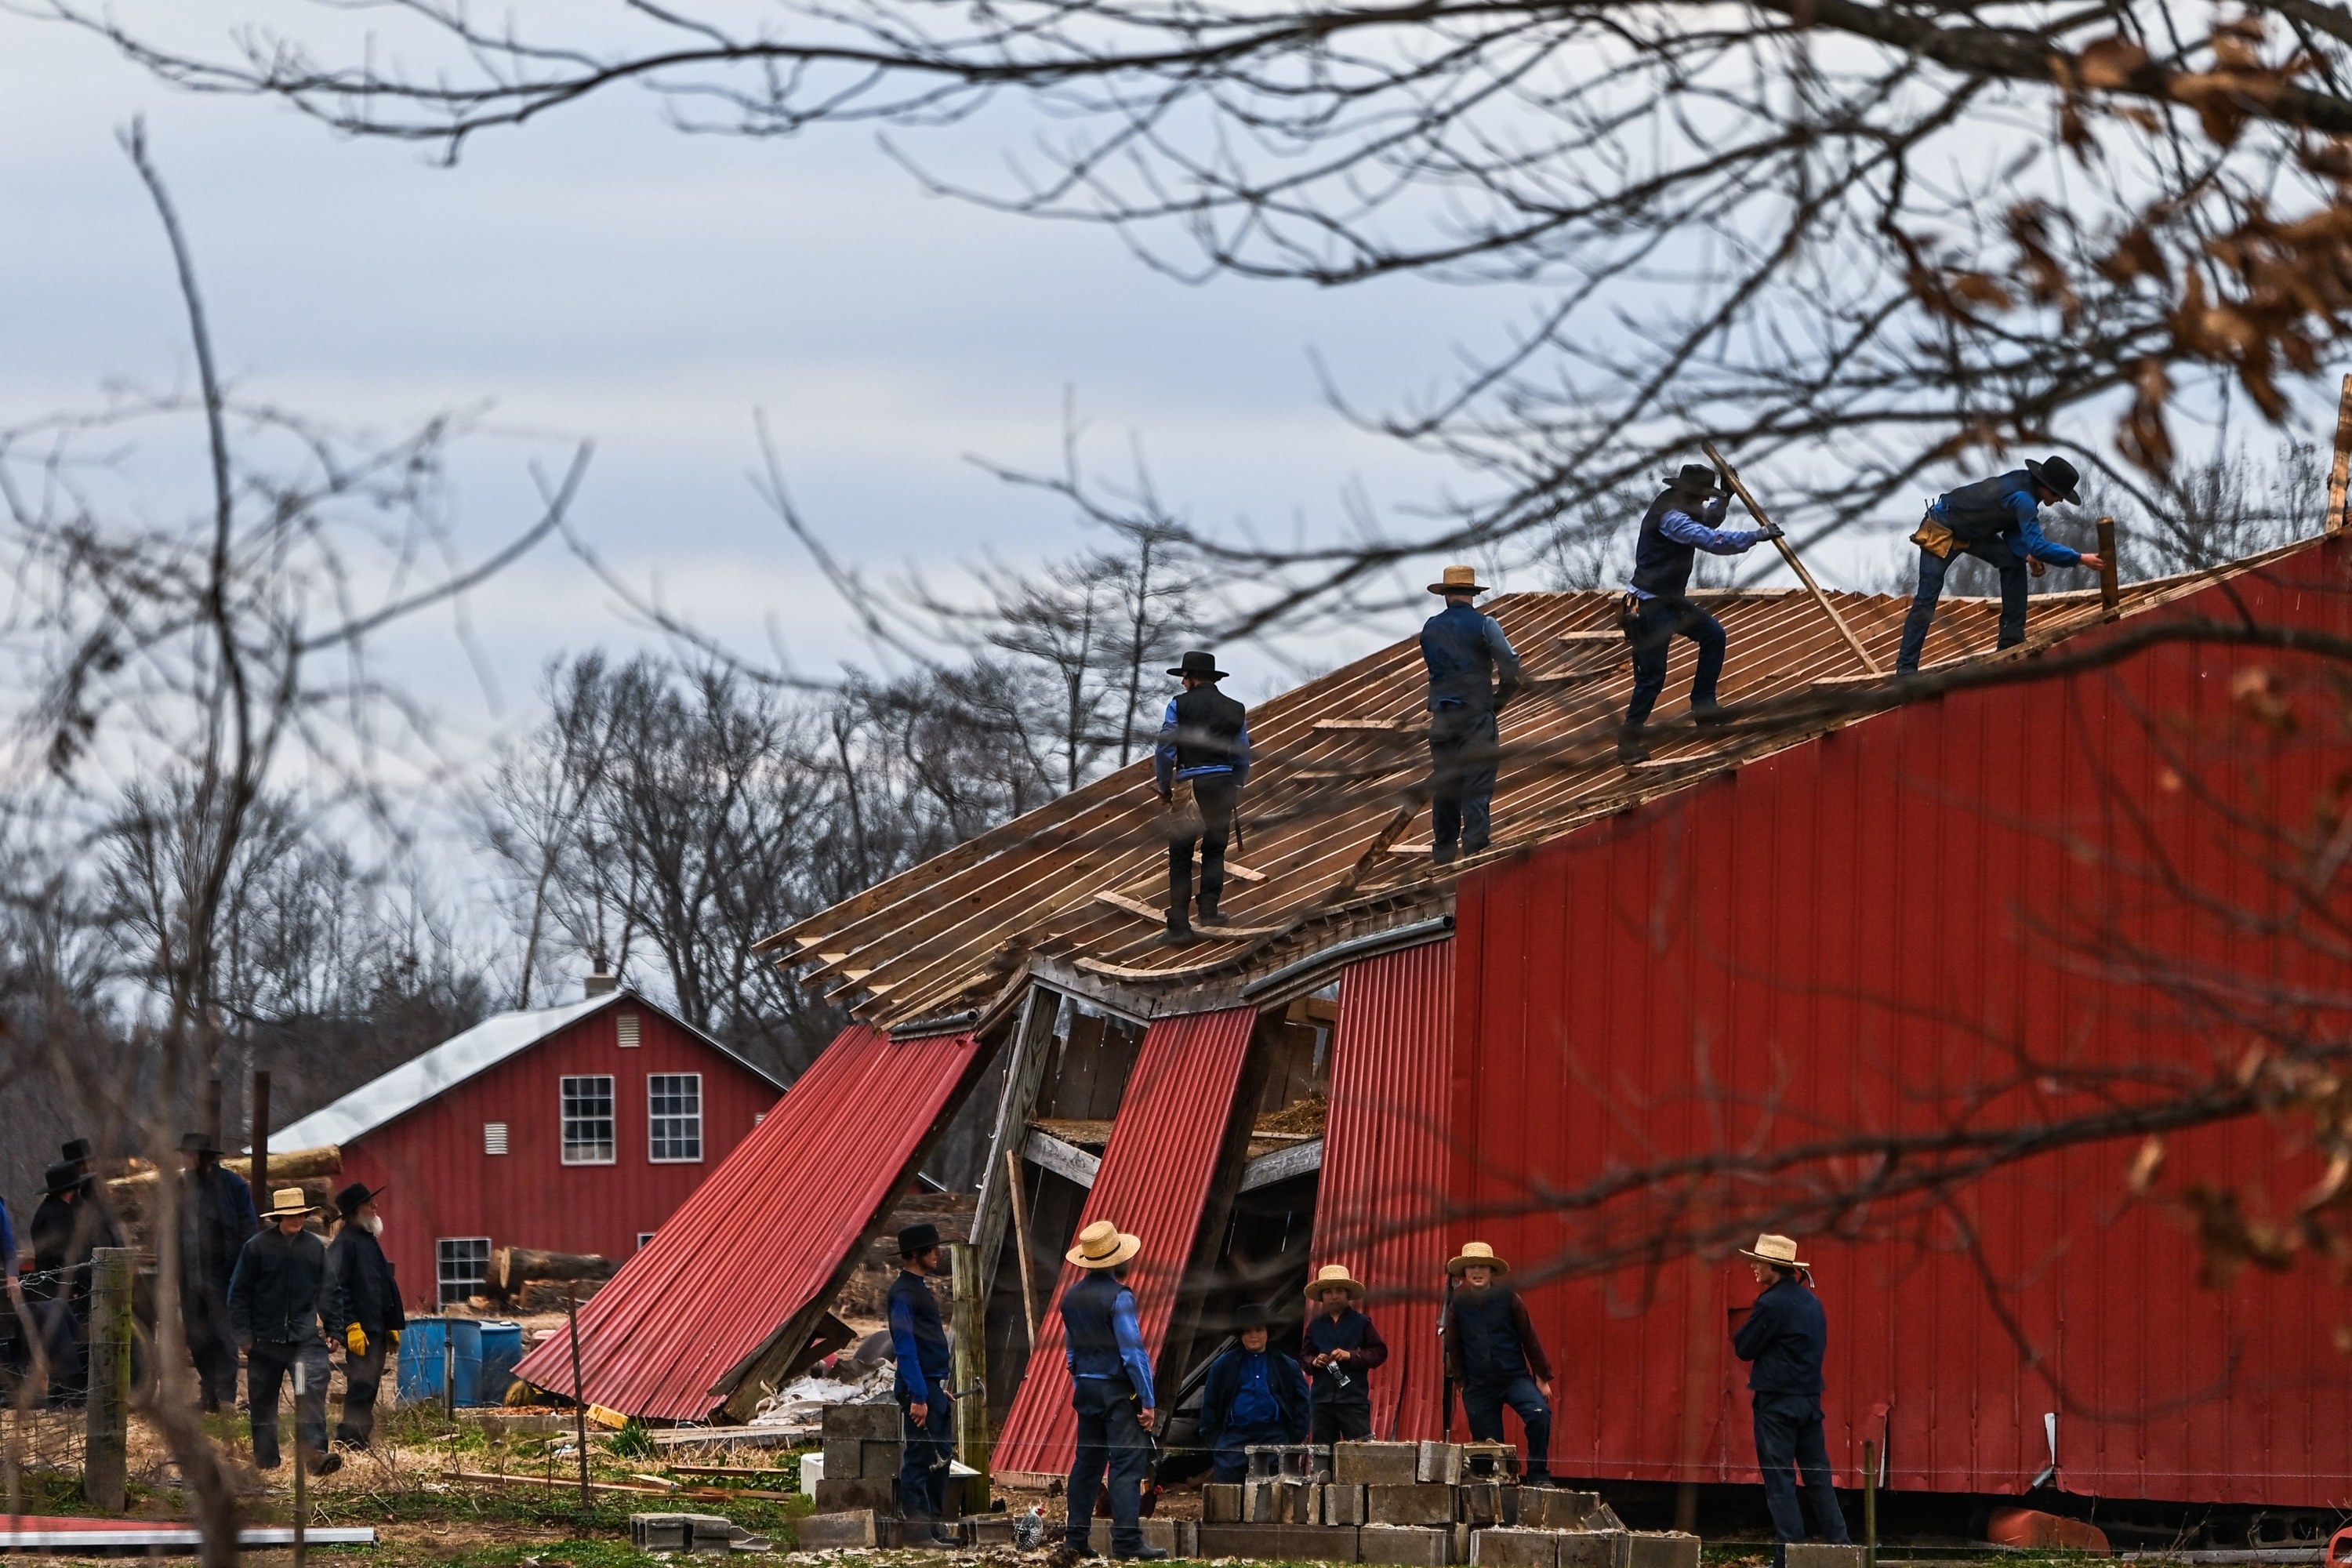 Workers on top and below a barn try to repair it, all wearing denim and Amish hats